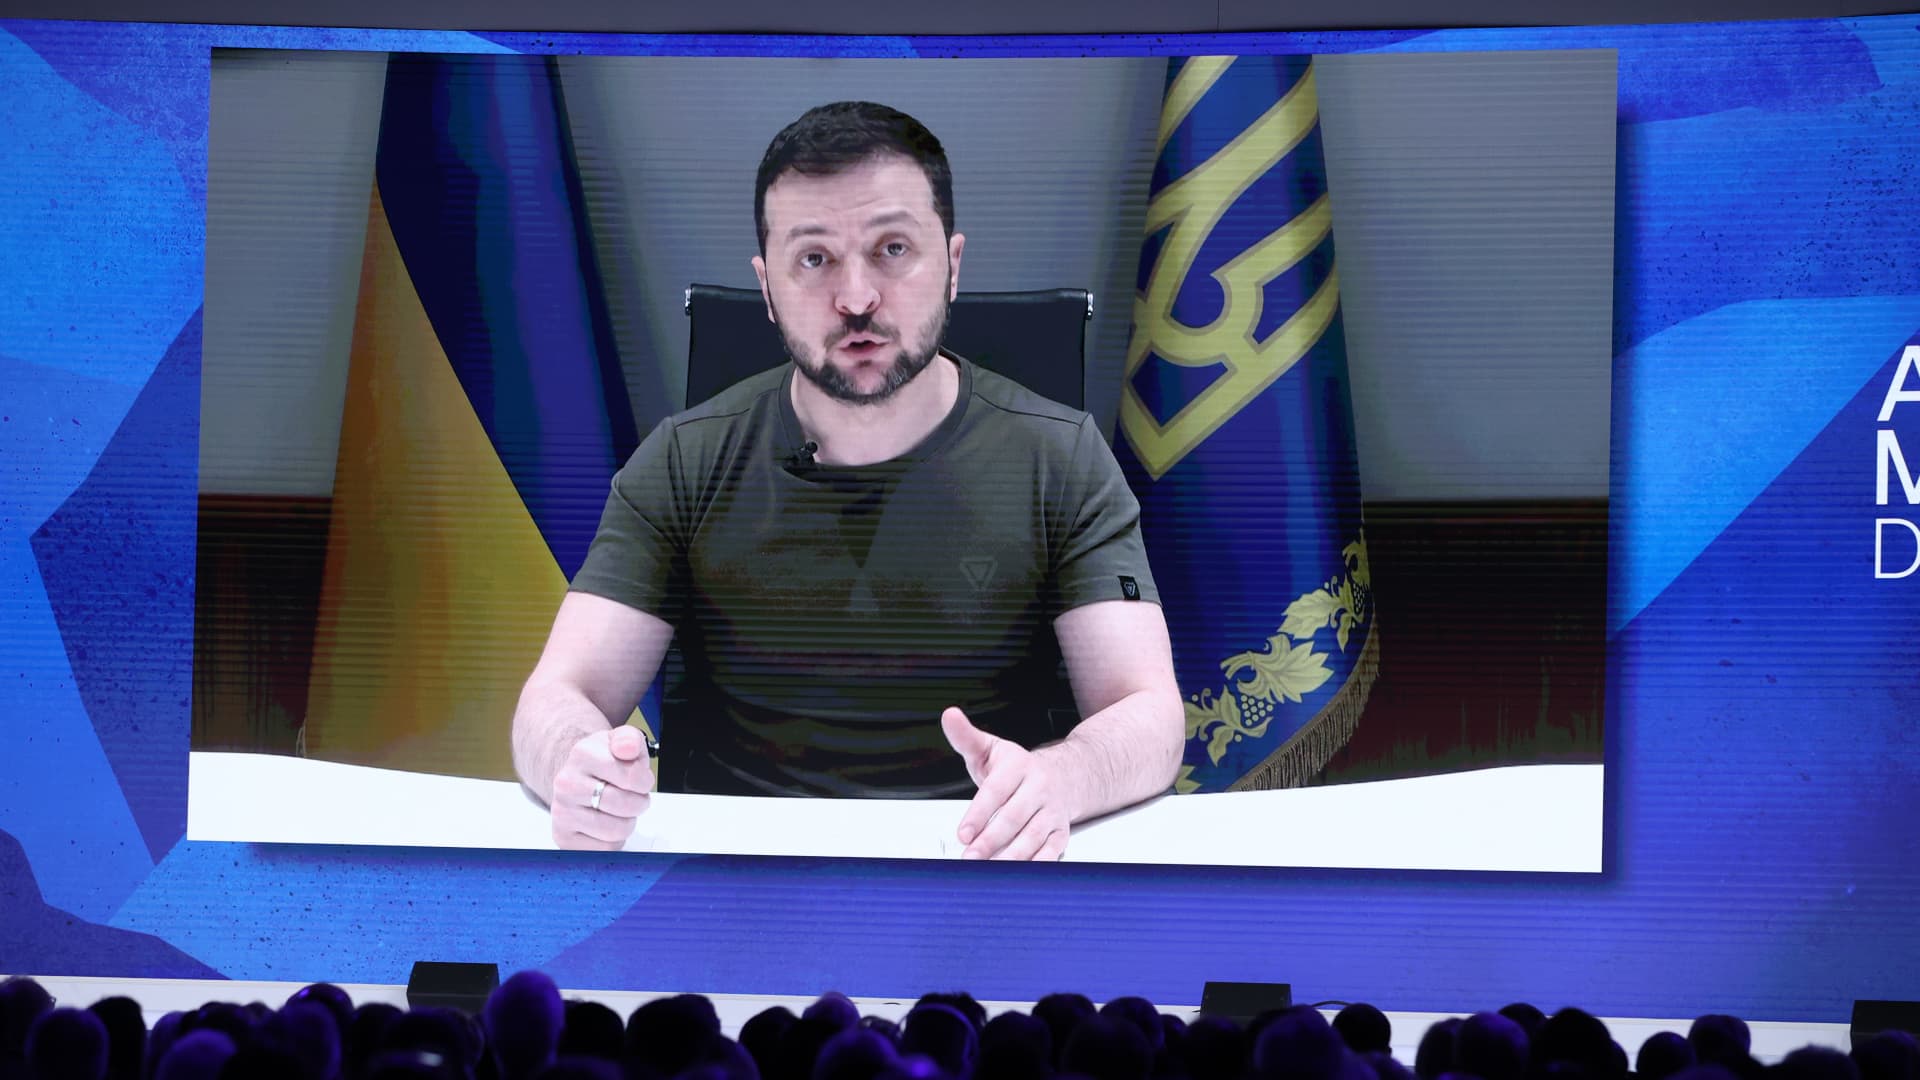 Zelenskyy tells Davos the world is at a 'turning point'; Russian soldier gets life sentence in first war crimes trial